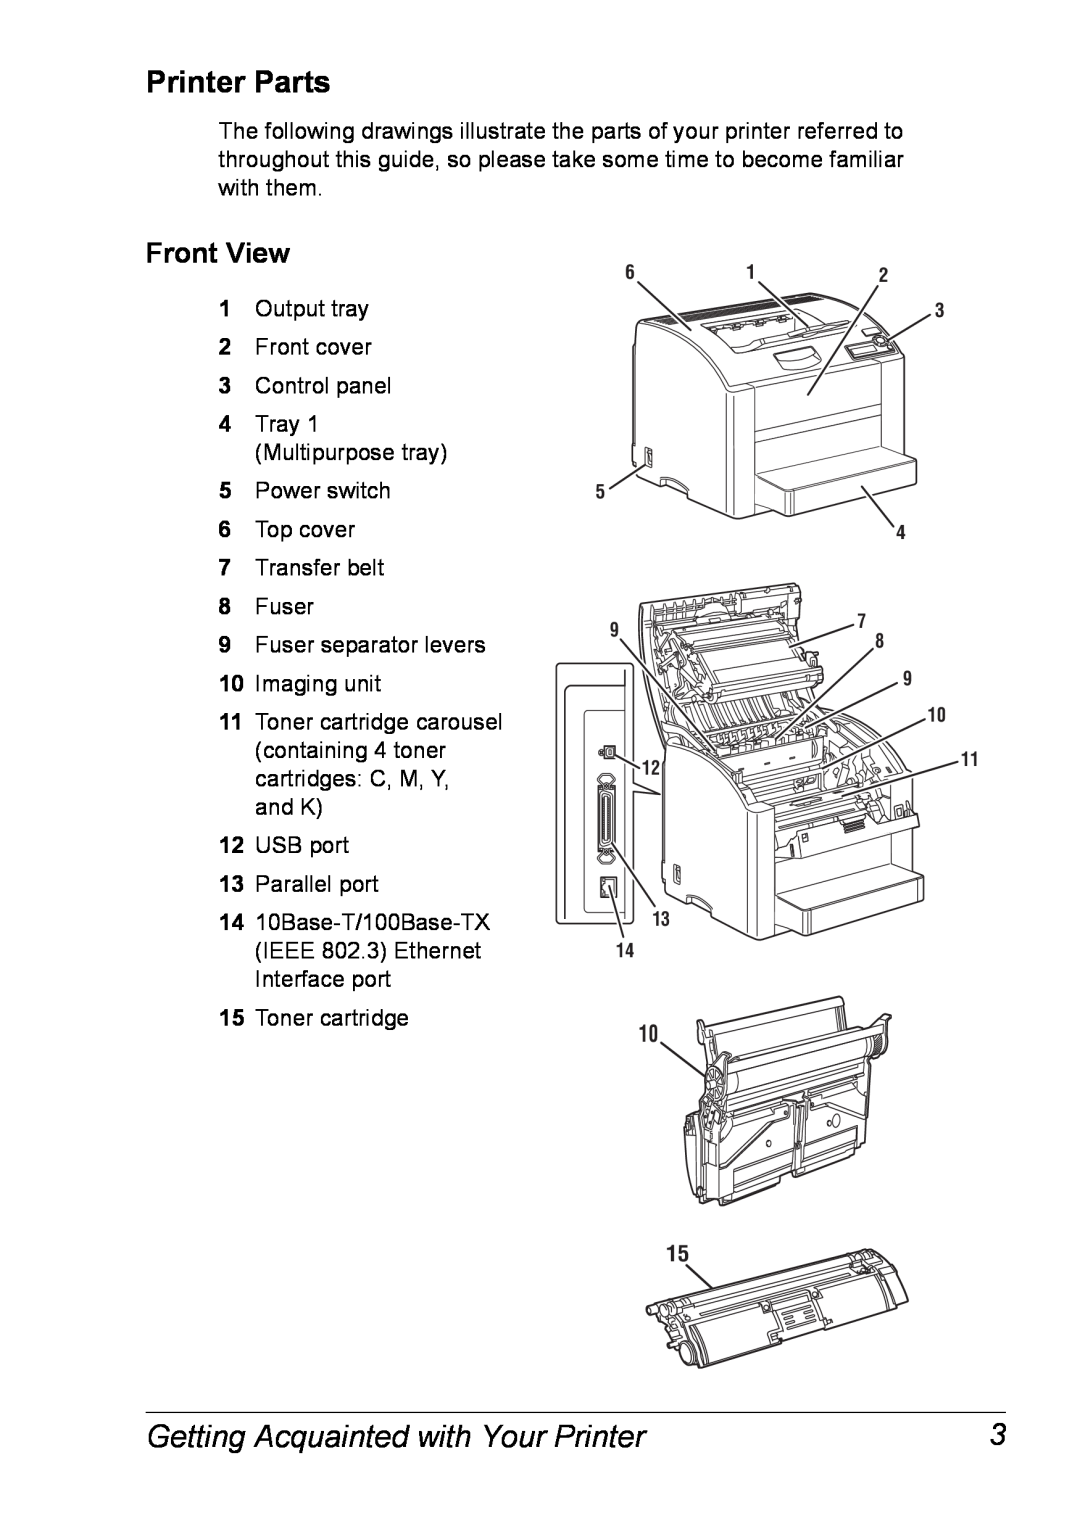 Xerox 6120 manual Printer Parts, Front View, Getting Acquainted with Your Printer 